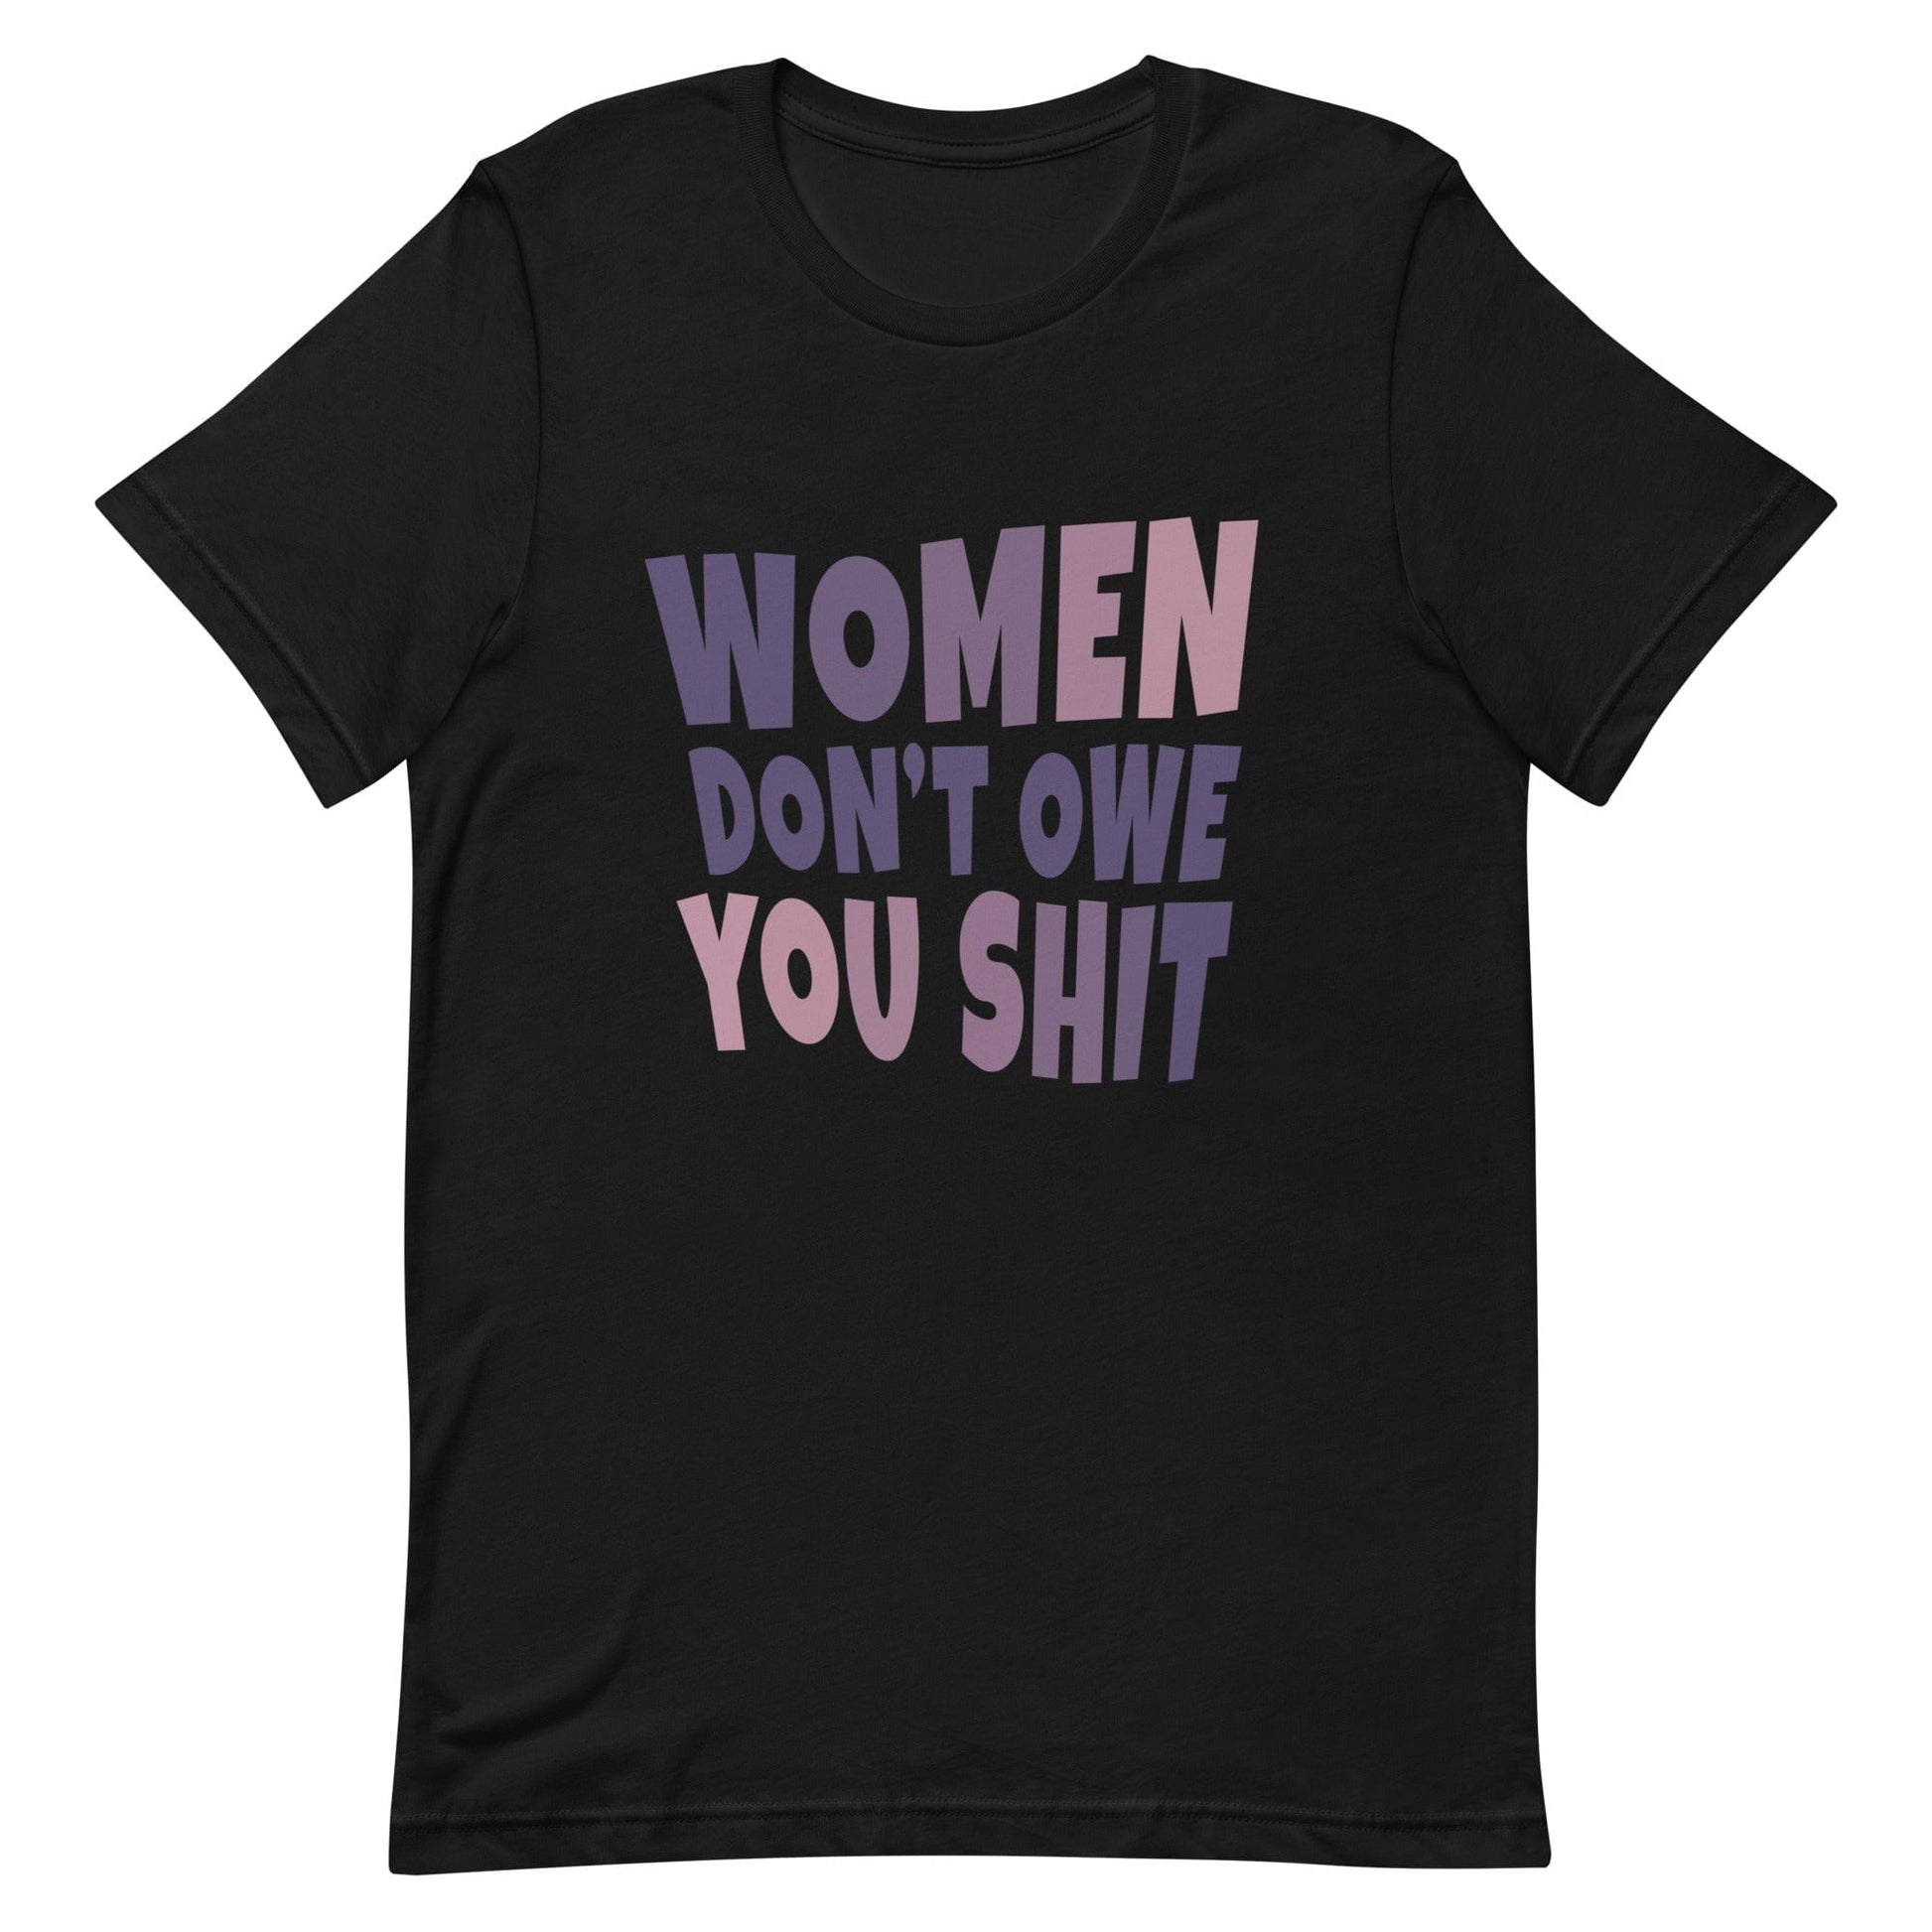 feminist-t-shirt-quote-women-don´t-owe-you-shit-black-at-feminist-define-front